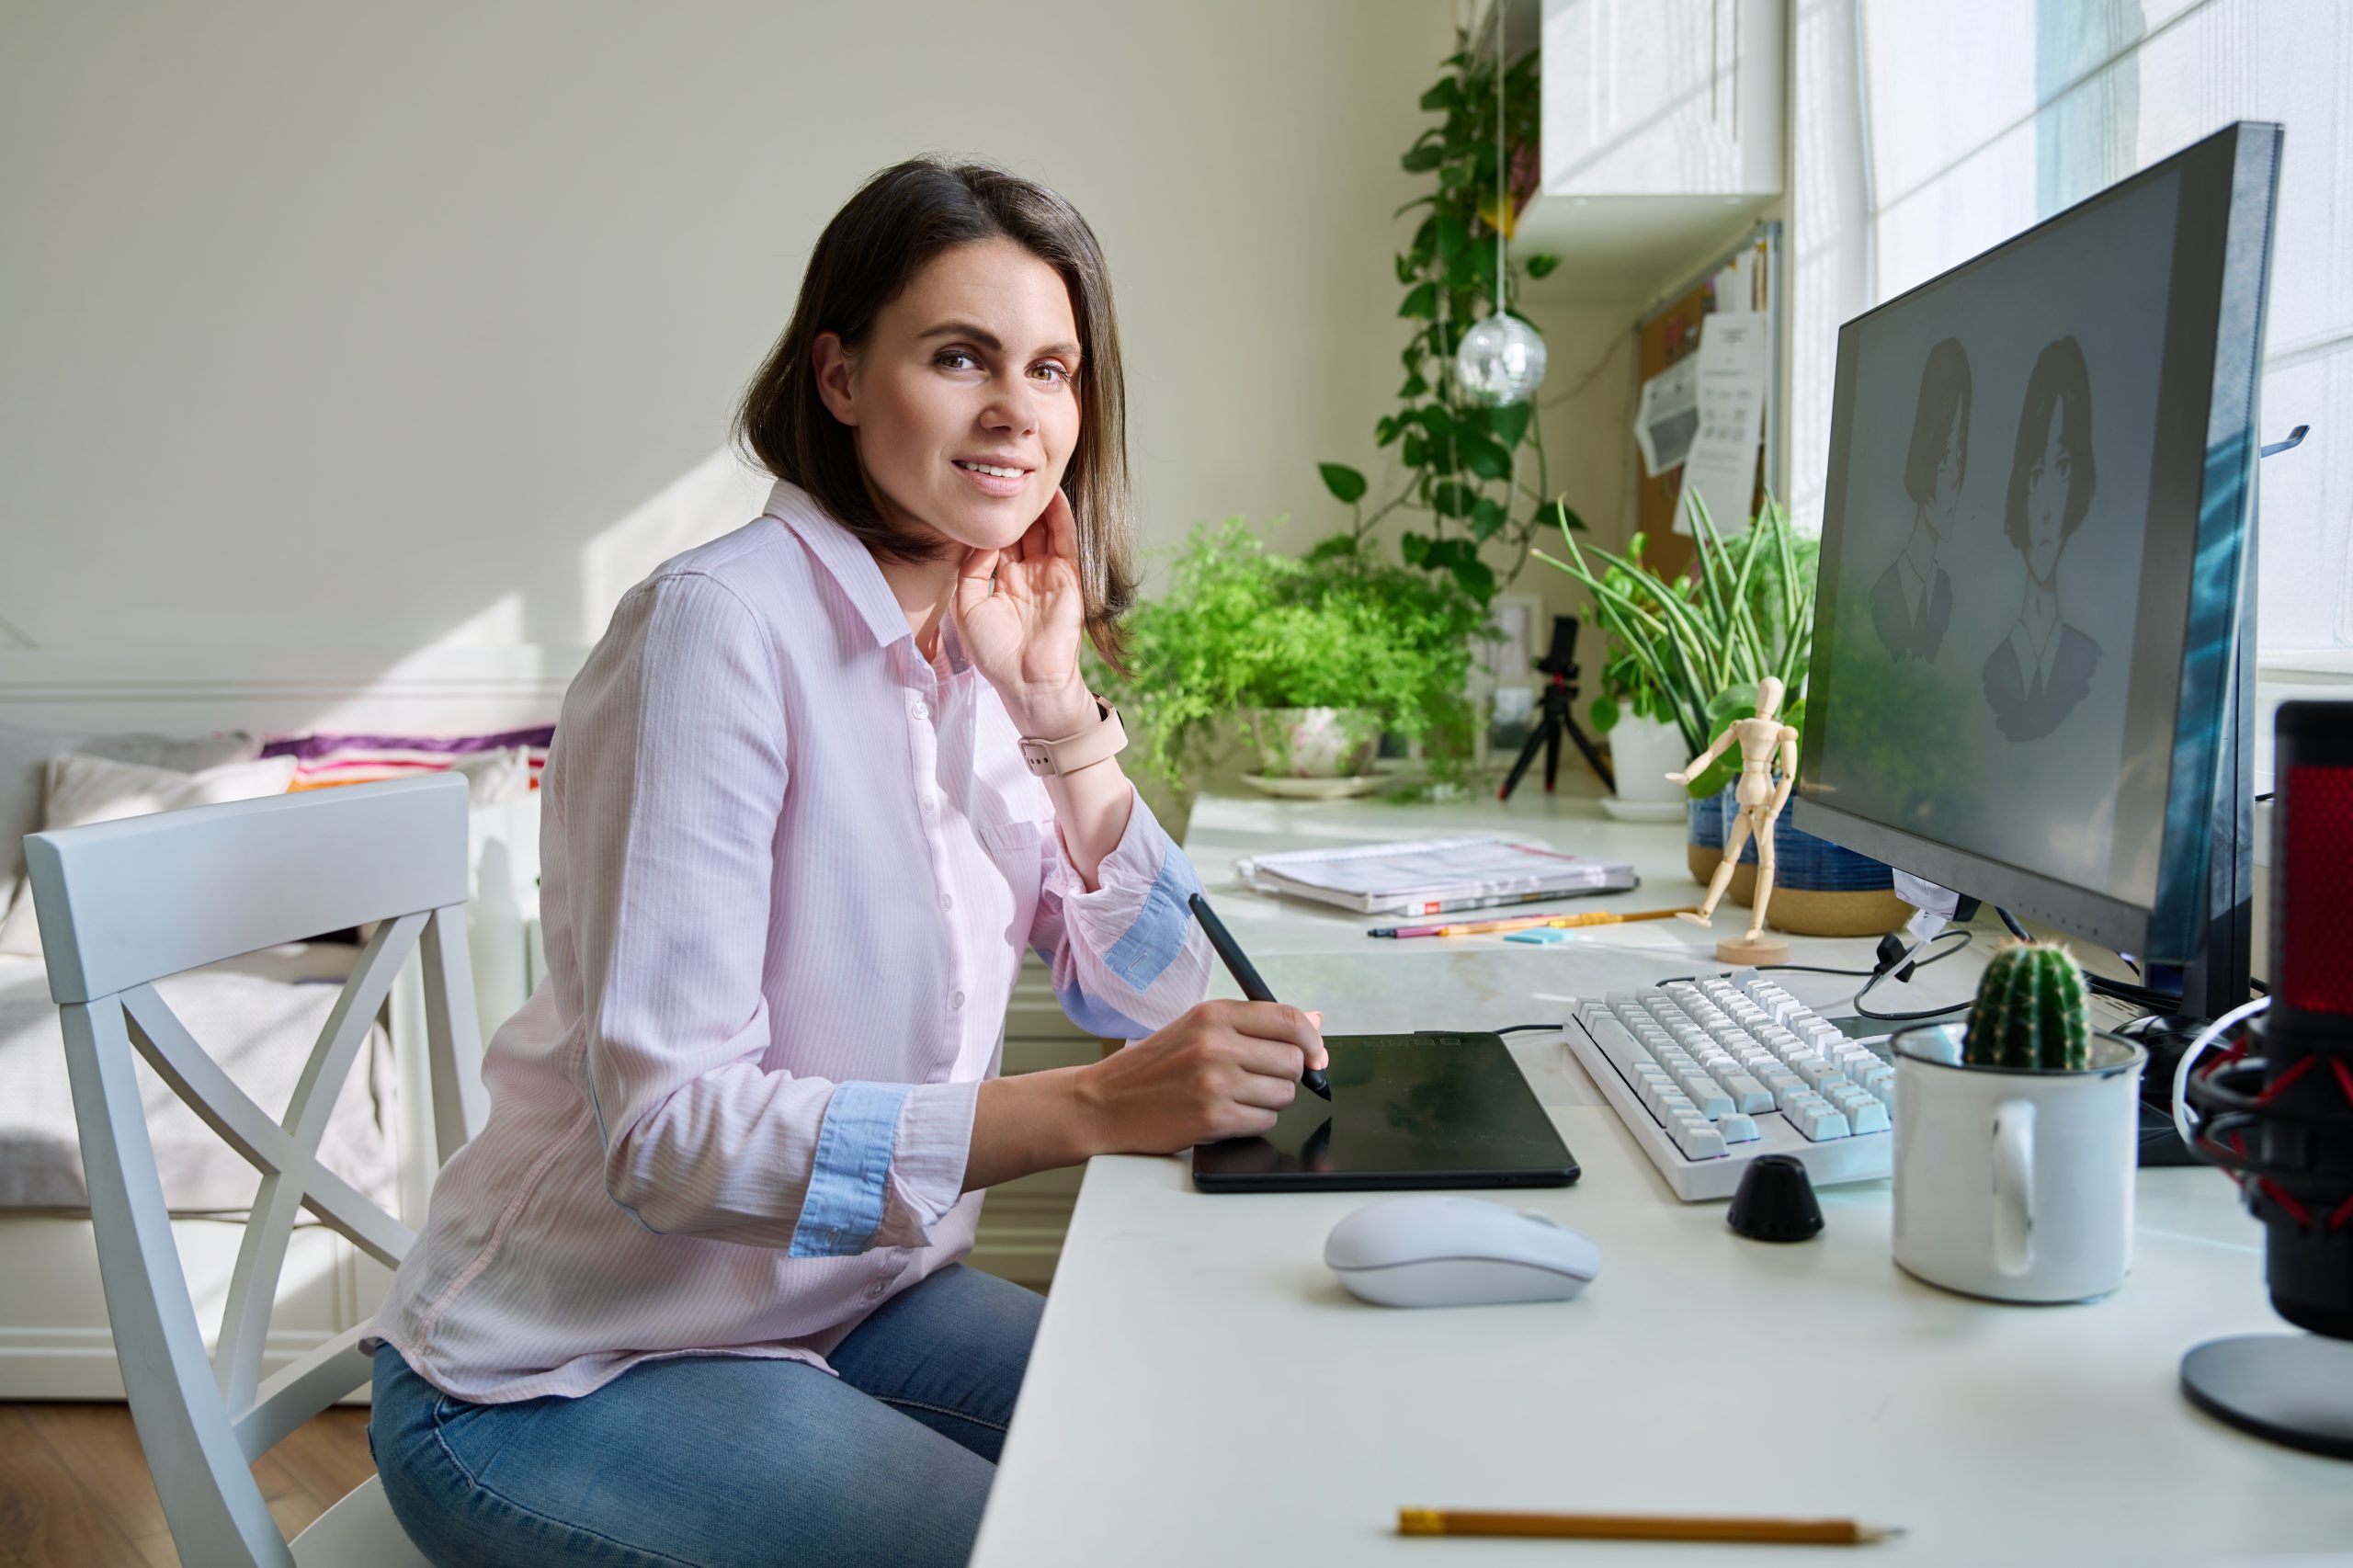 Portrait of young woman graphic designer looking at camera, female drawing sketch on graphic tablet, sitting in home office, freelancer working remotely. Designer creating characters for illustration